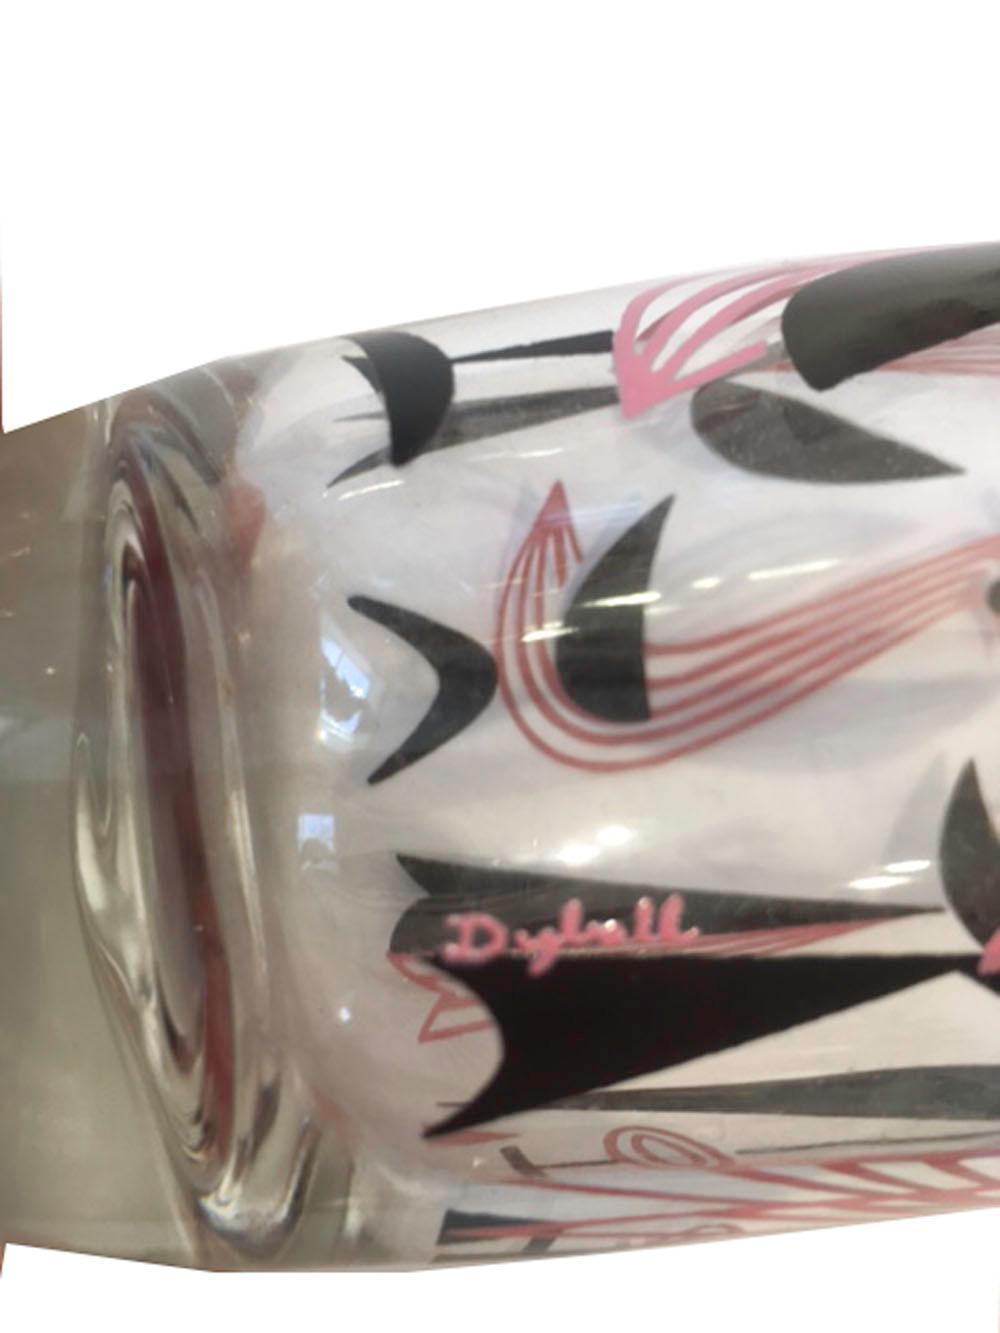 Glass Vintage Art Deco 11 Piece Dyball Cocktail Set with Pink and Black Stylized Birds